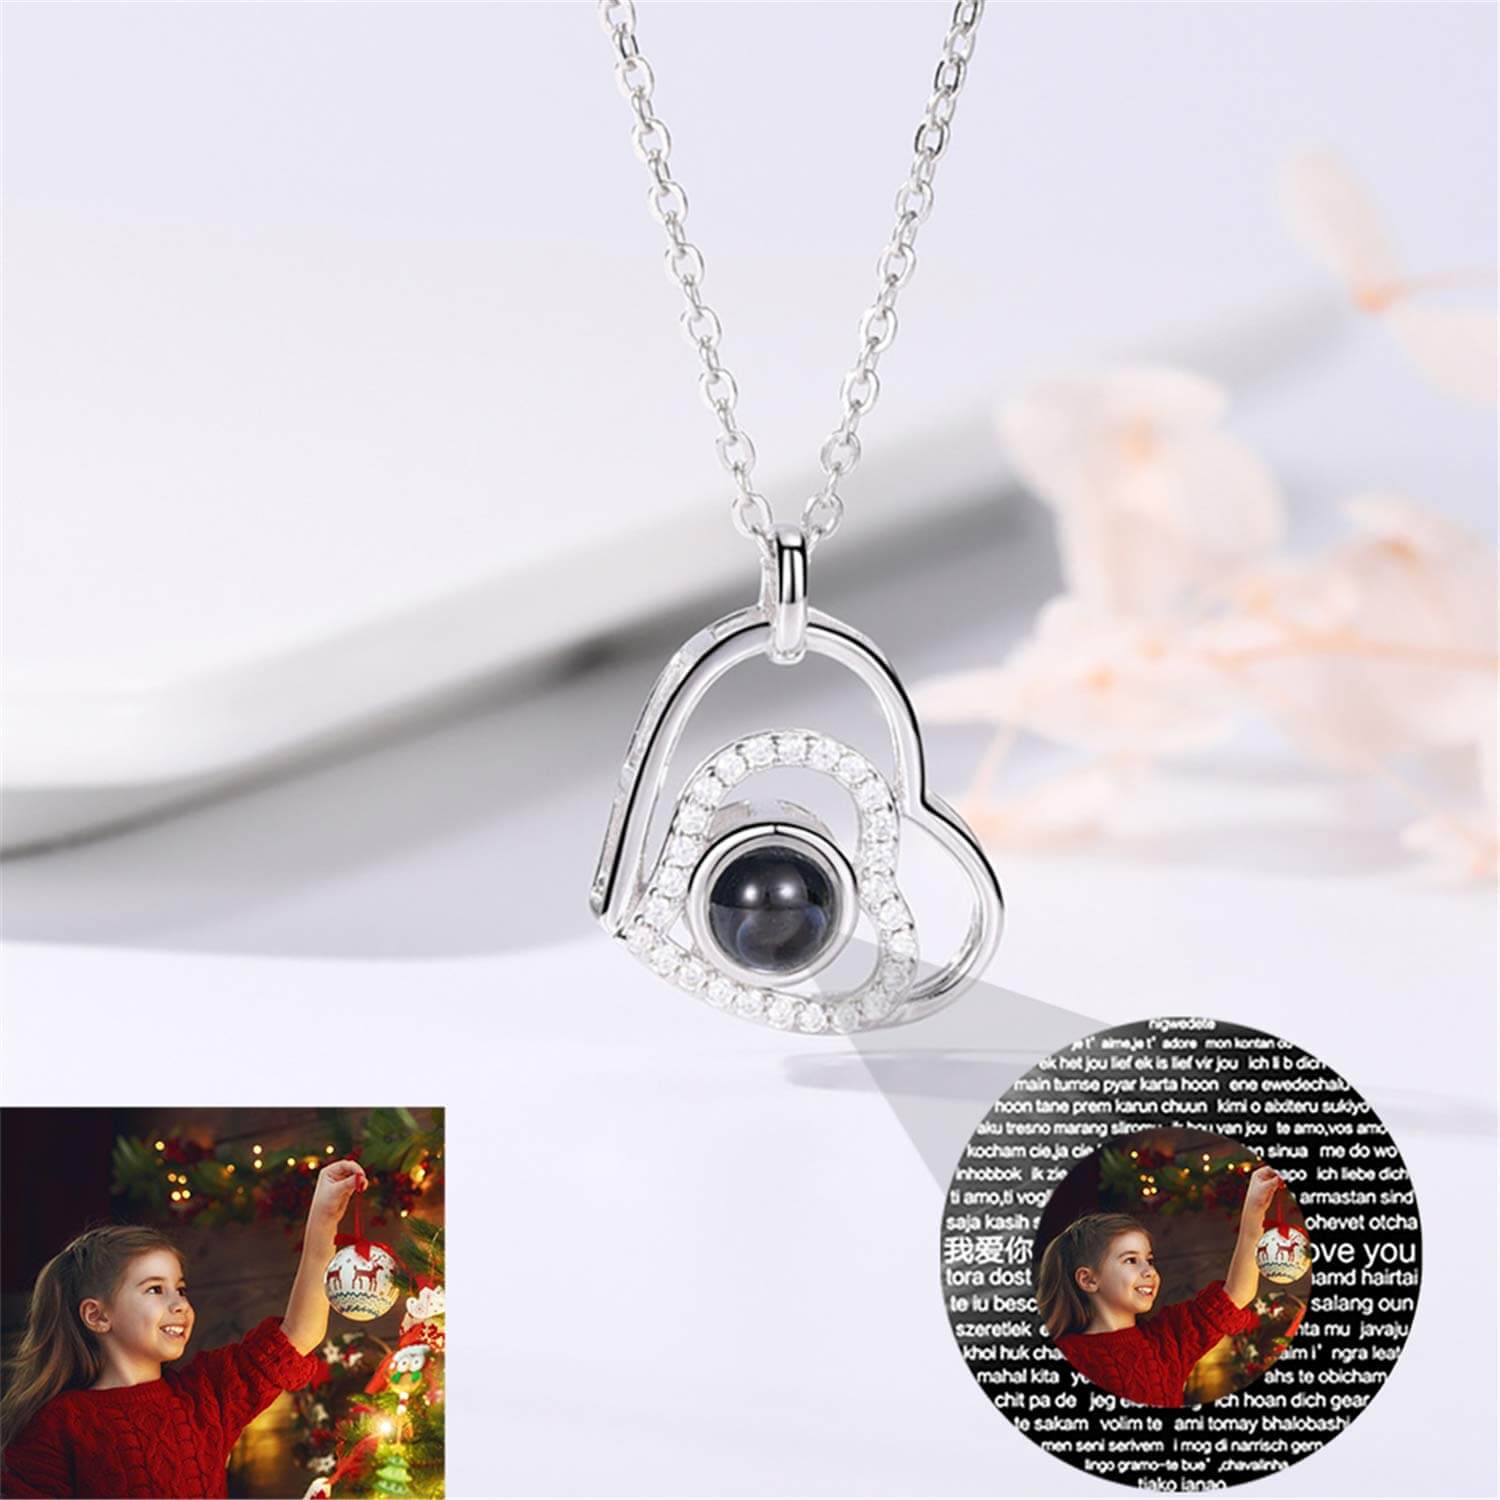 Heart Pendant 100 Languages "I Love You" With Color Photo Projection Necklace Personalized Custom White Gold Photo Necklace-silviax